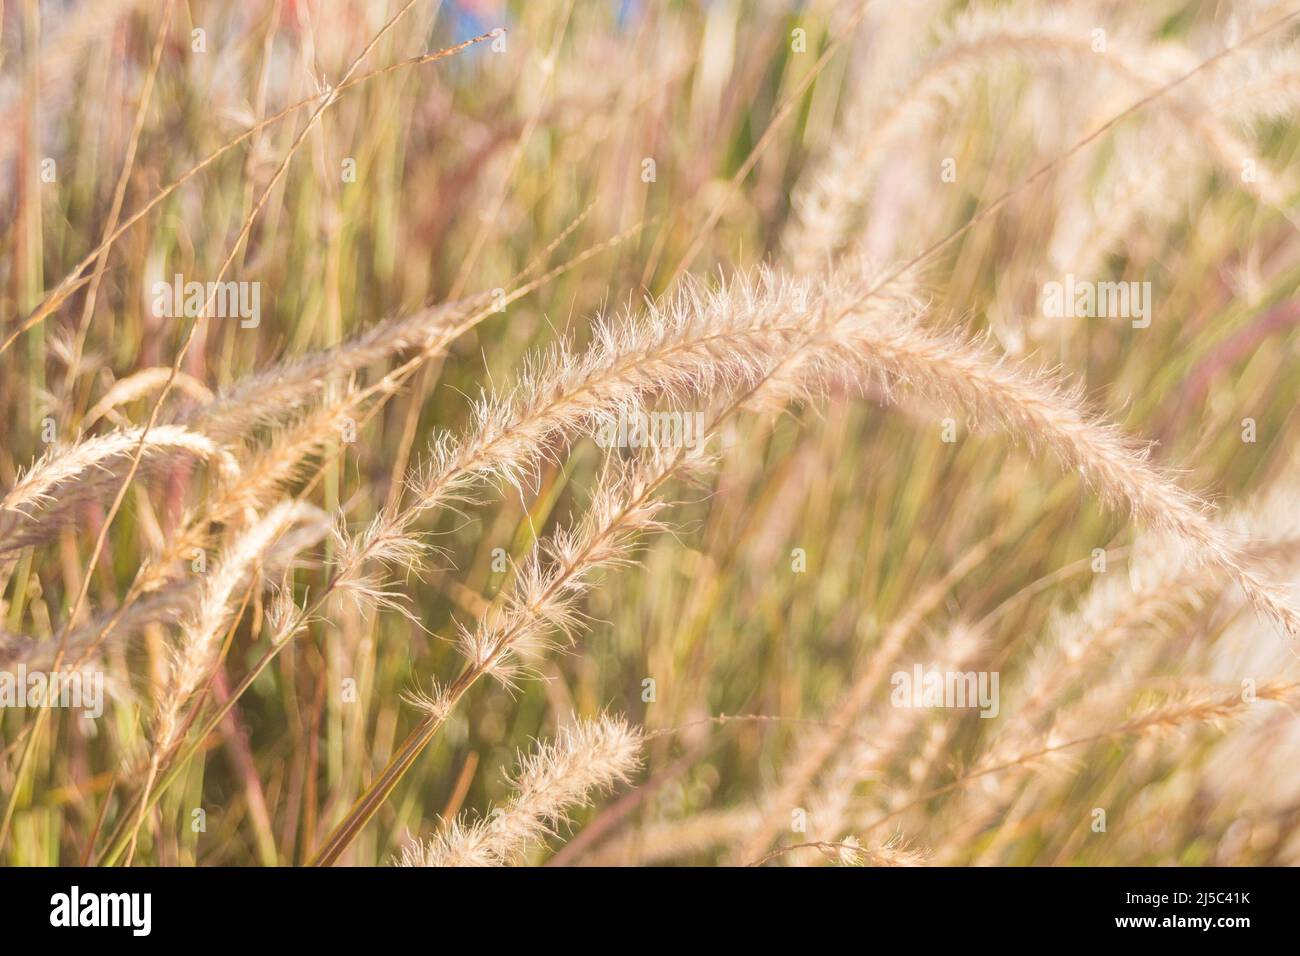 Natural background. Beautiful fluffy spikelets. Cereal plant Cenchrus setaceus close-up. Dried grass beige. Selective focus, blurry. Stock Photo